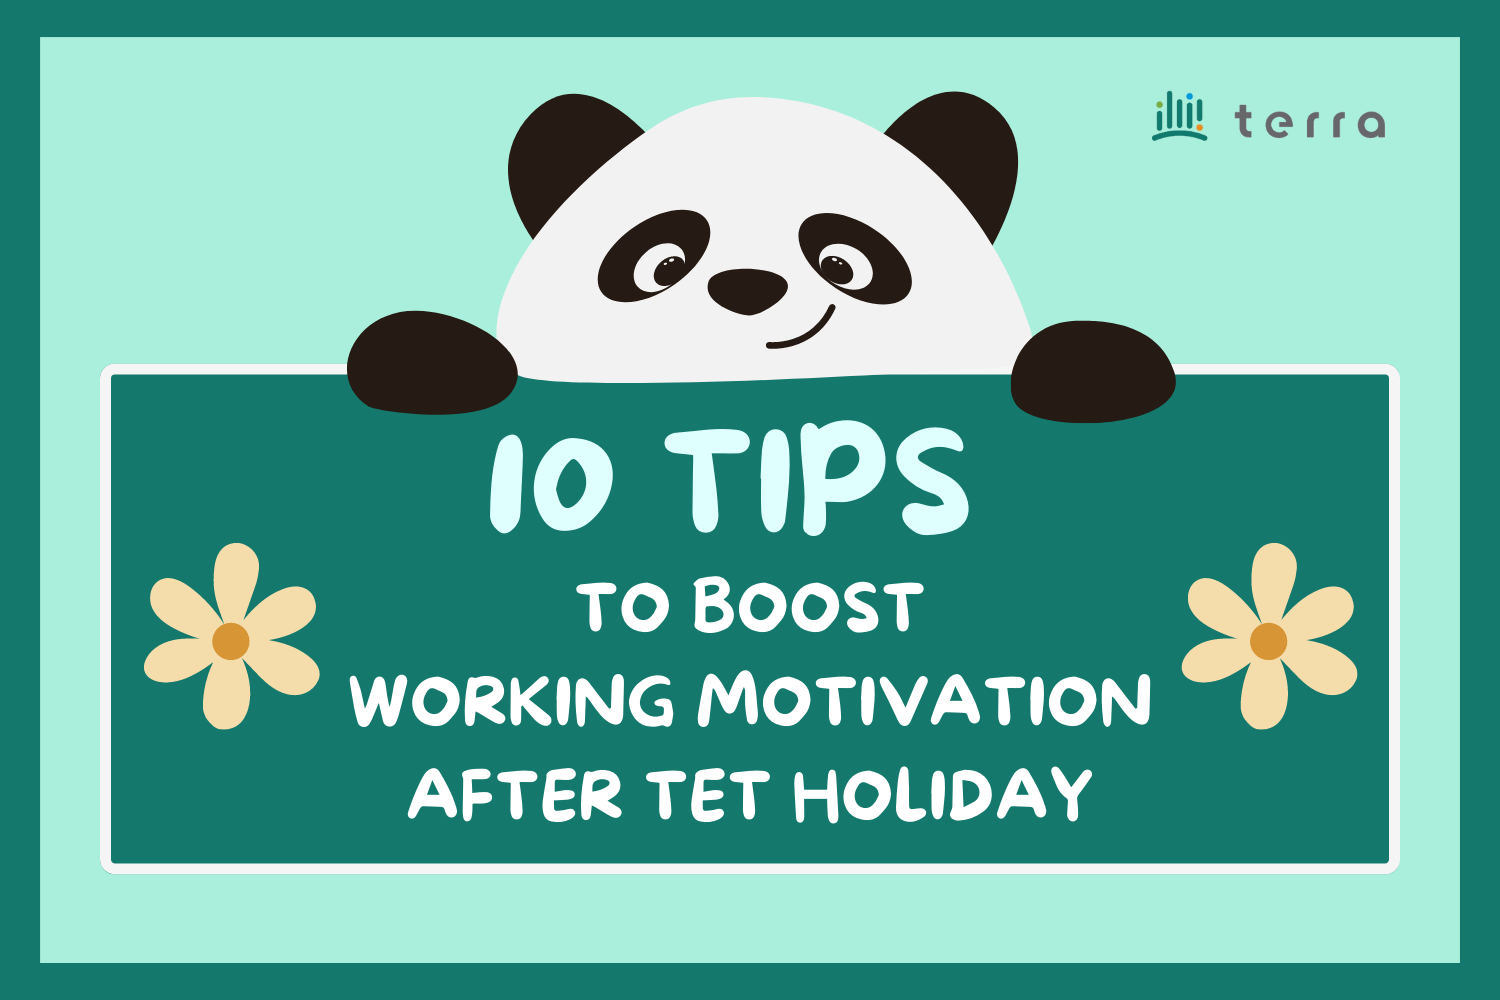 10 tips to boost working motivation after Tet holiday